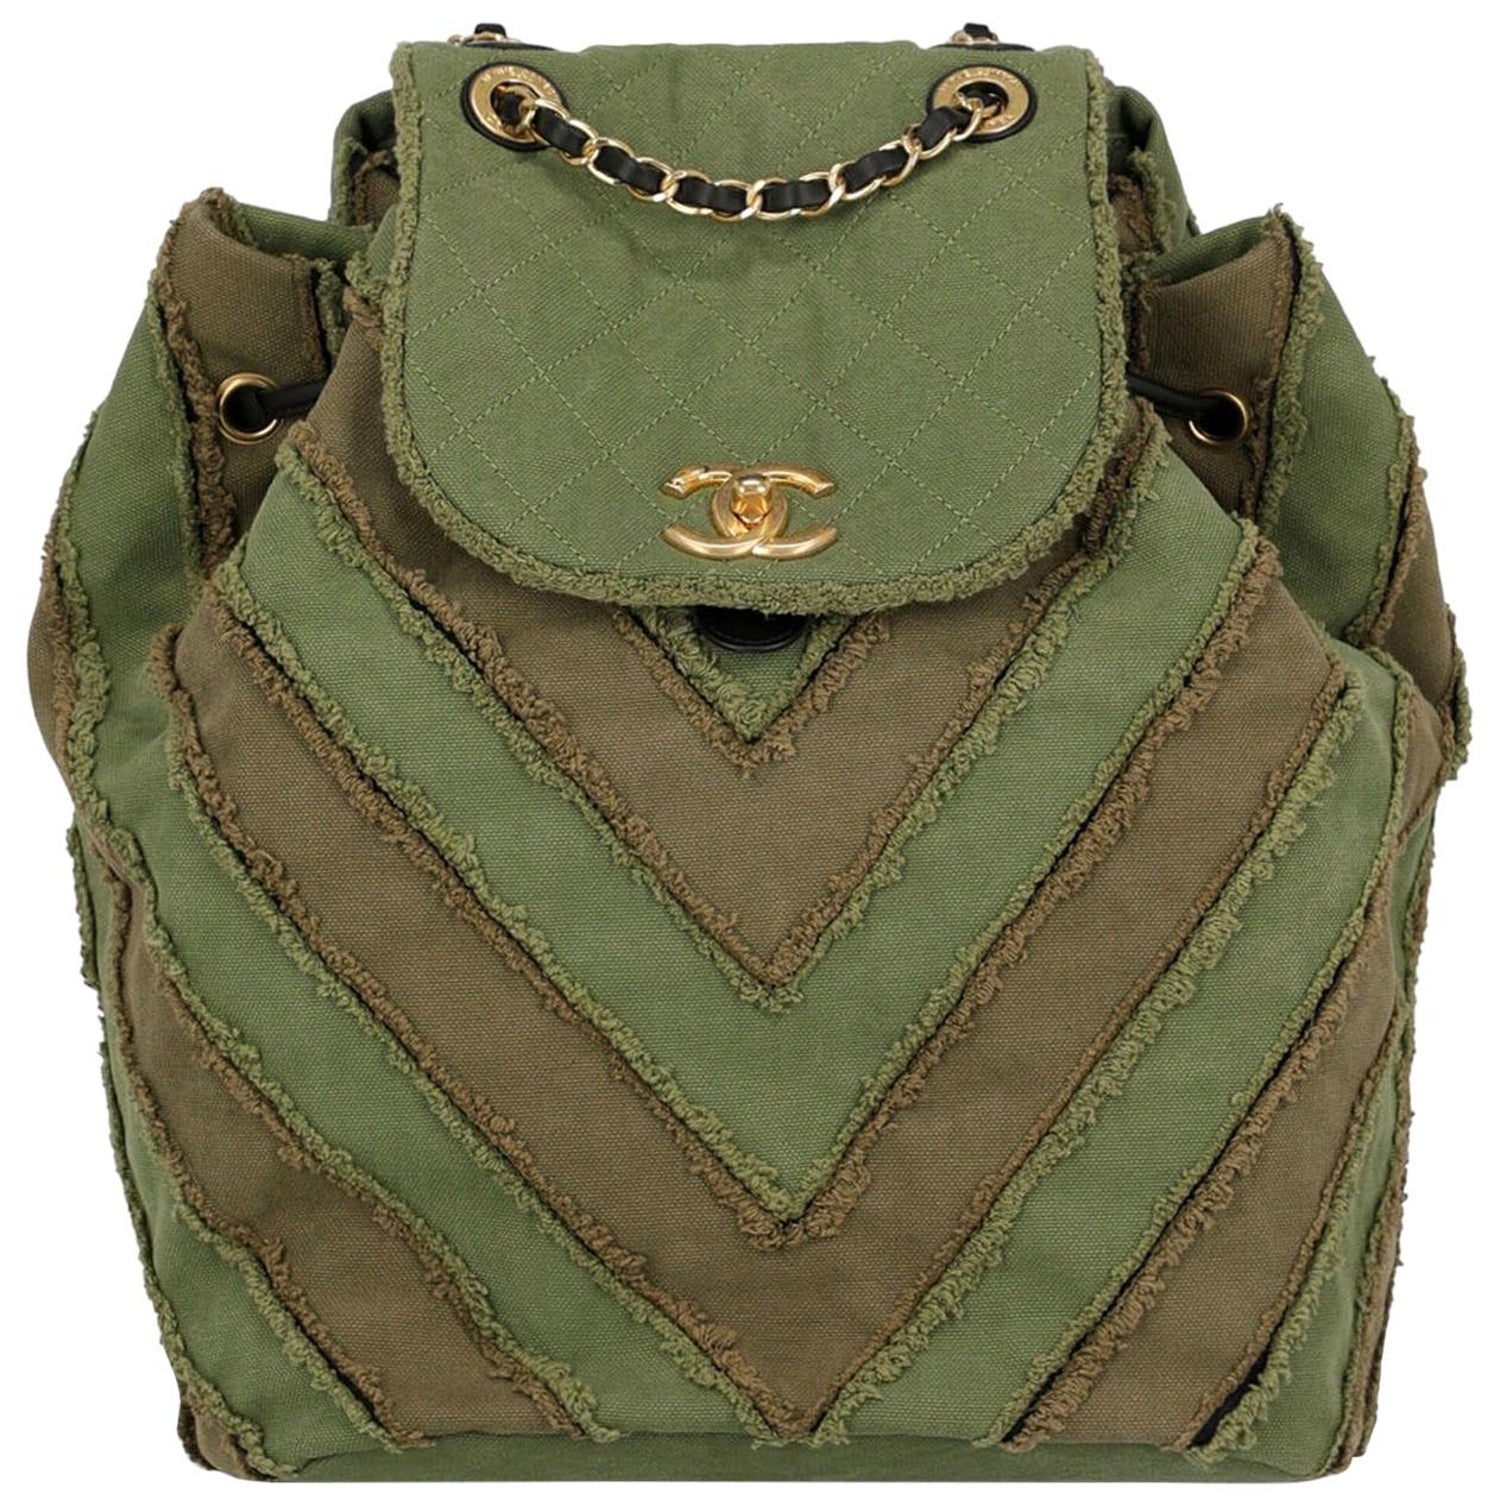 Green Chanel Backpack - 3 For Sale on 1stDibs